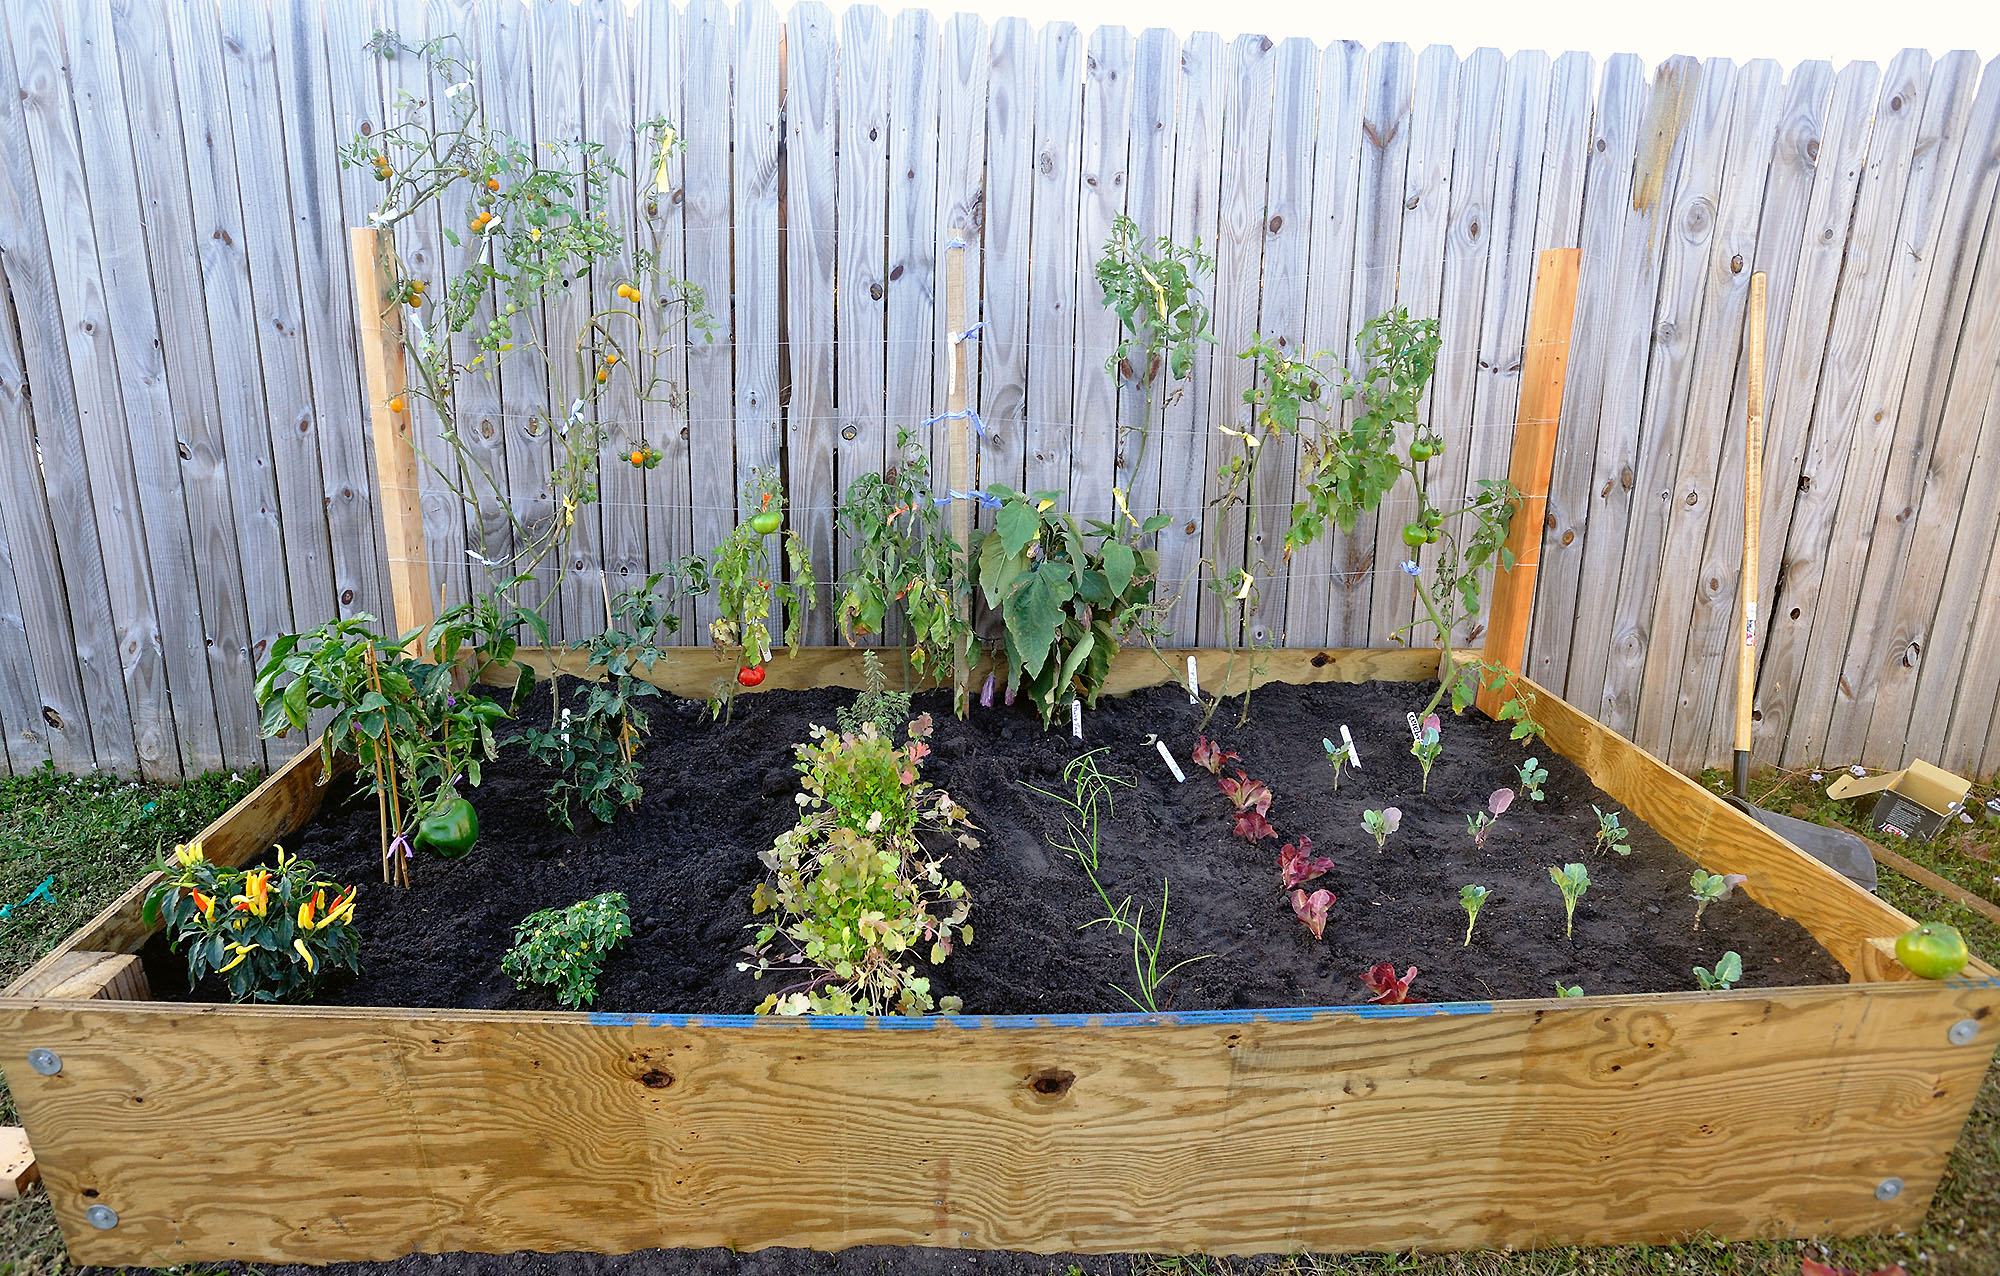 newly planted vegetable garden